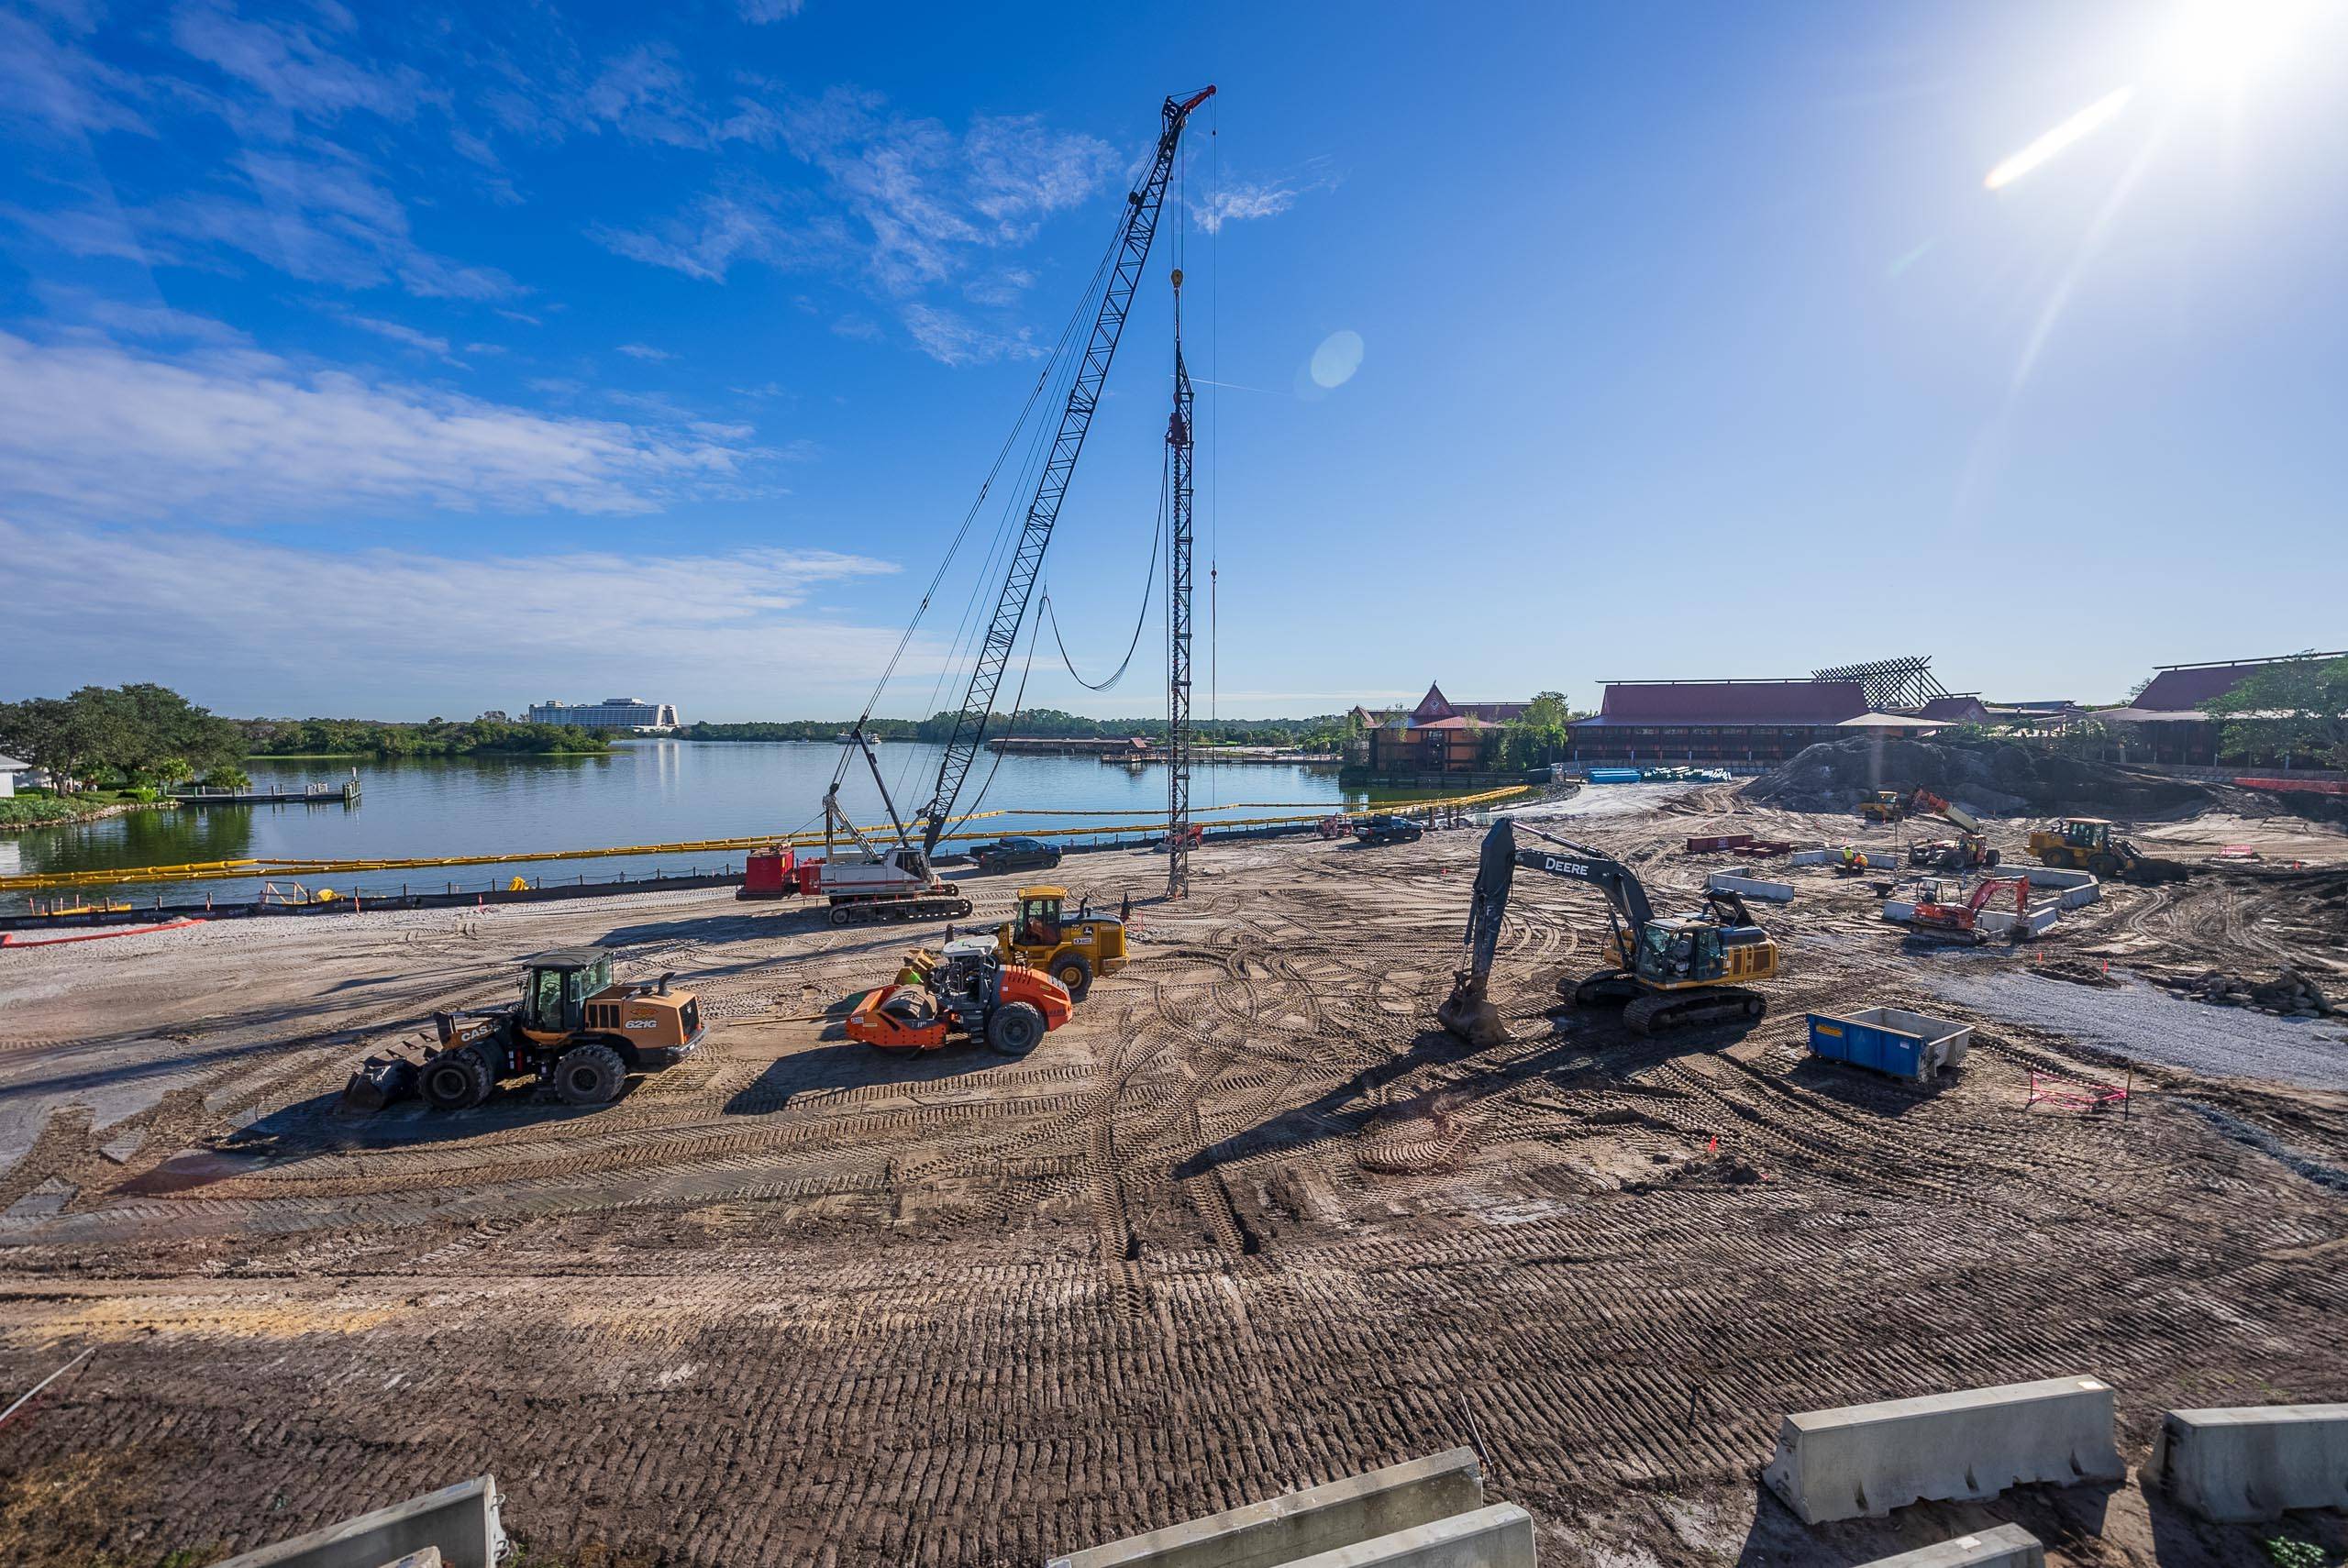 Foundation work begins at the site of the new Disney Vacation Club Tower at Disney's Polynesian Village Resort